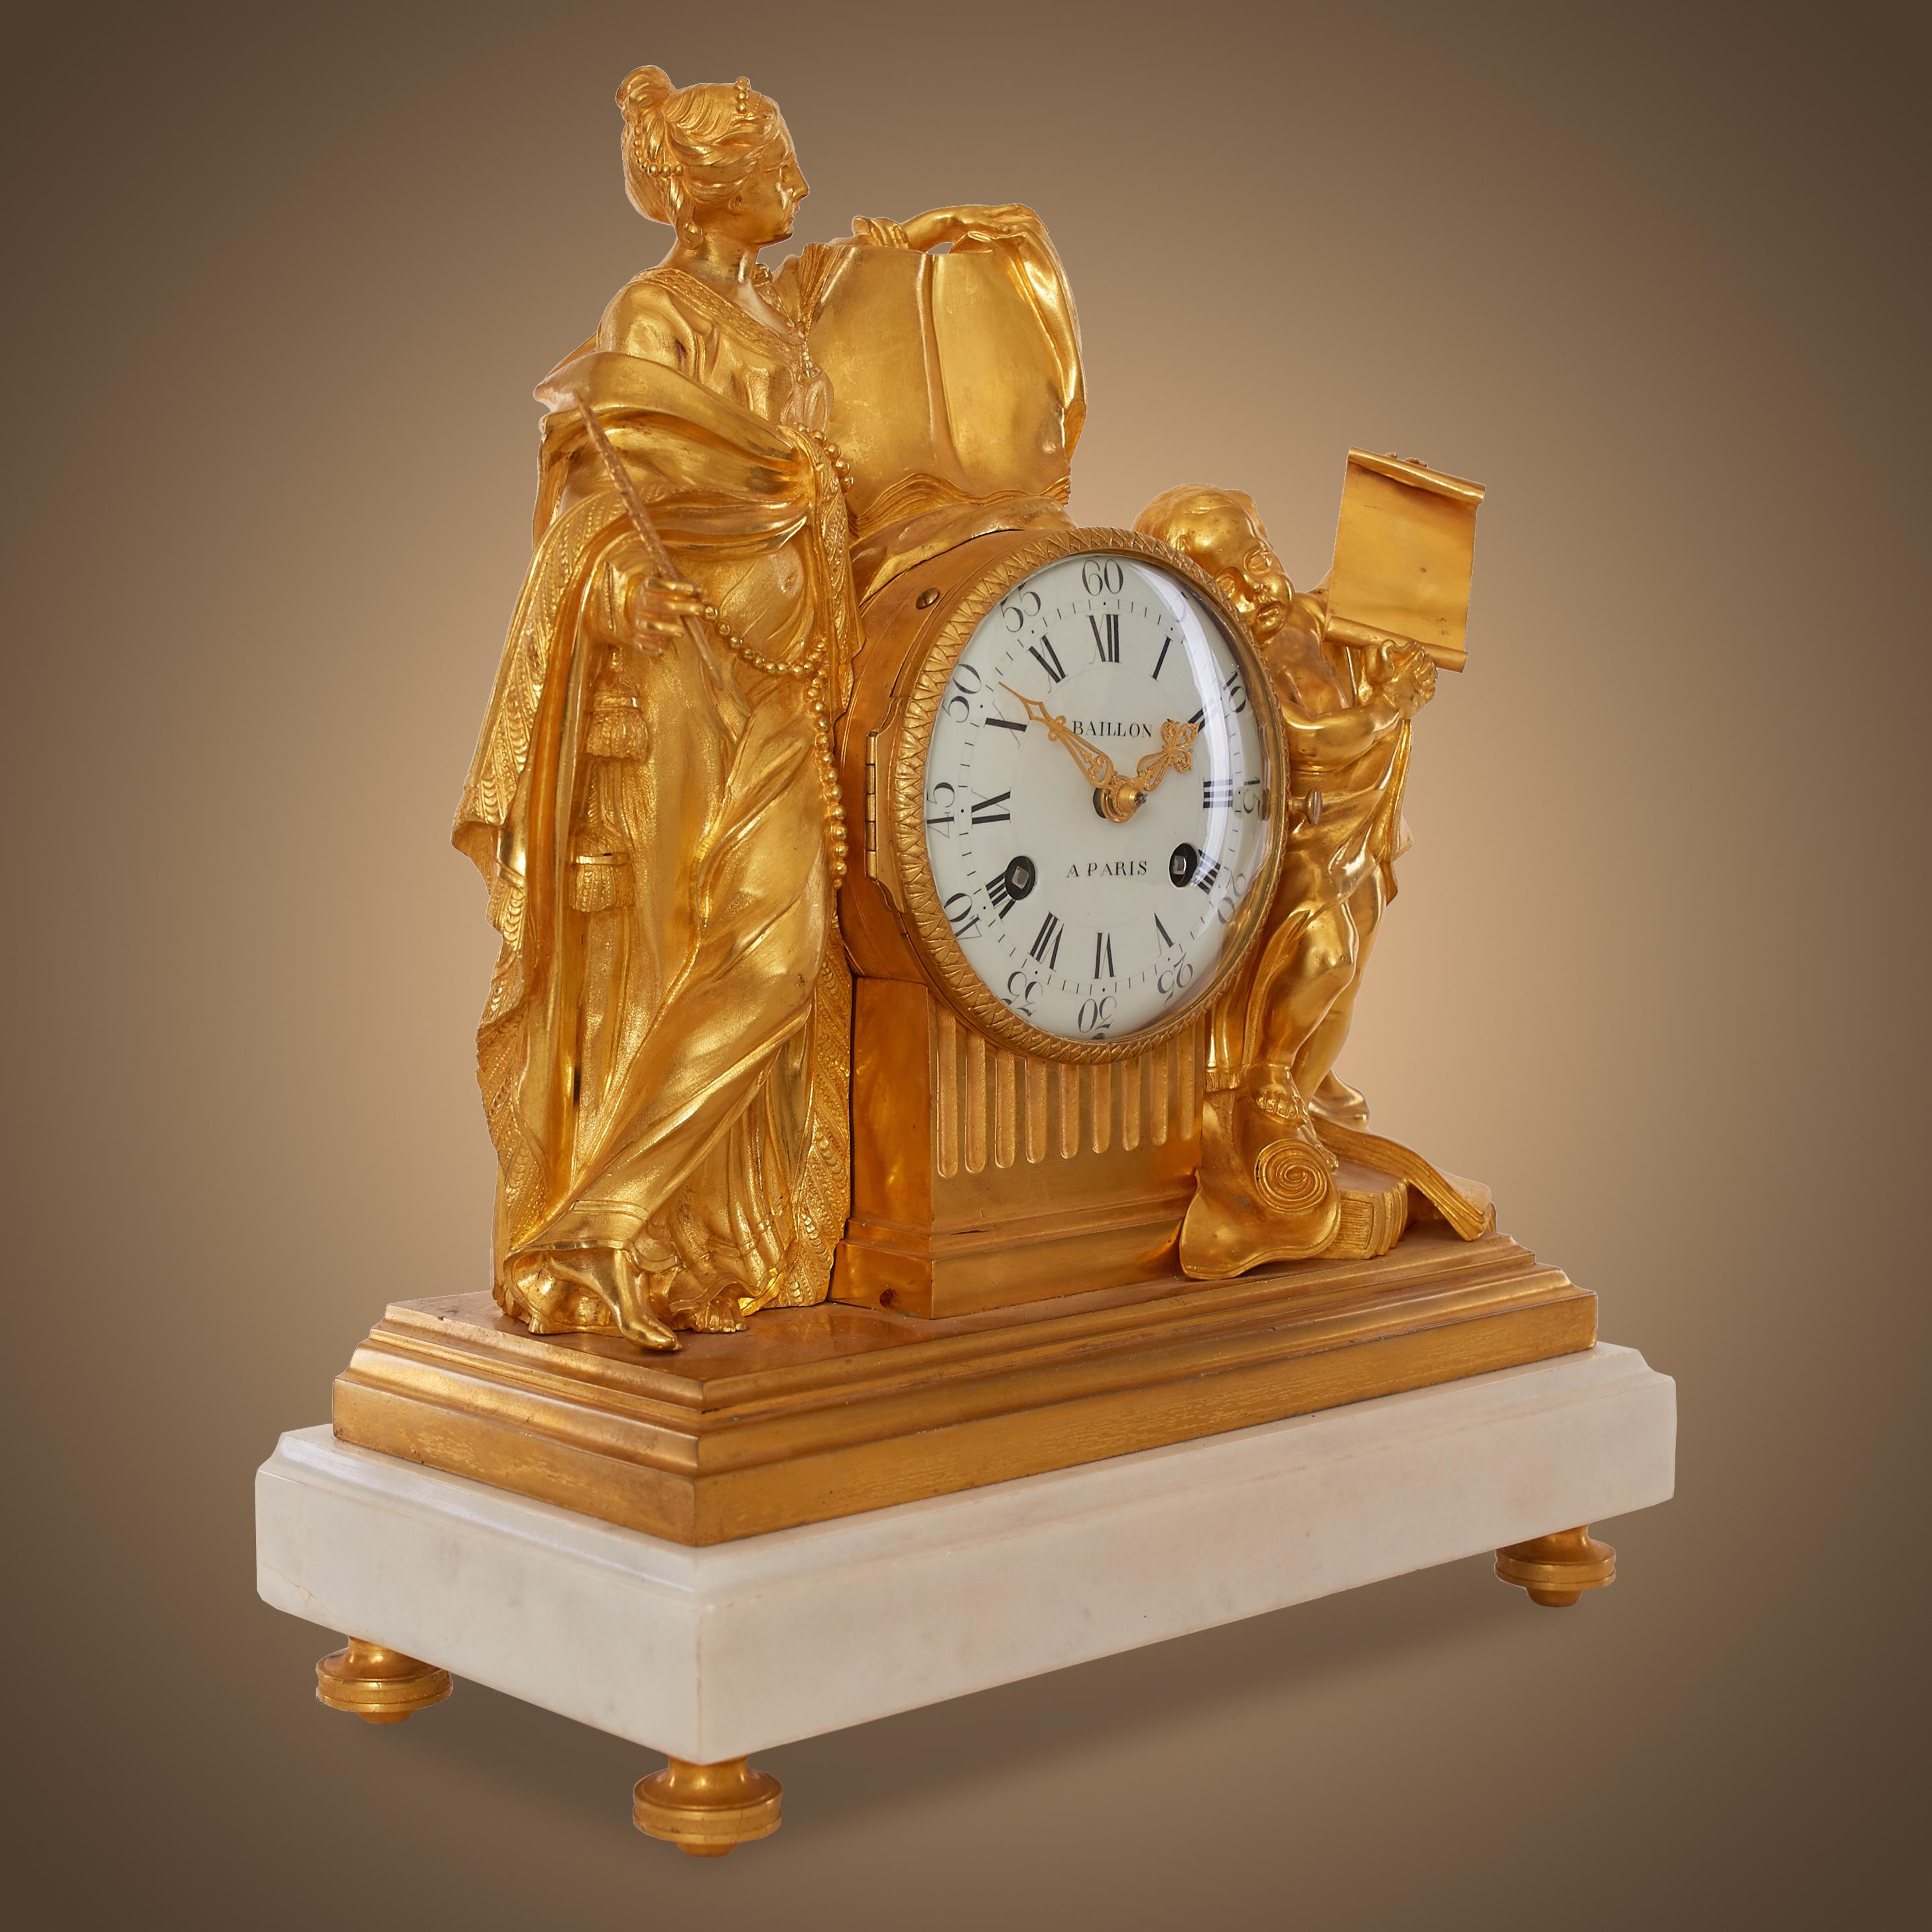 This is a unique, authentic antique French table or mantel clock. It is in finely chiseled and gilded bronze. The dial with outer Arabic numerals and inner Roman numerals and a fine pair of pierced gilt brass hands for the hours and minutes. Next to